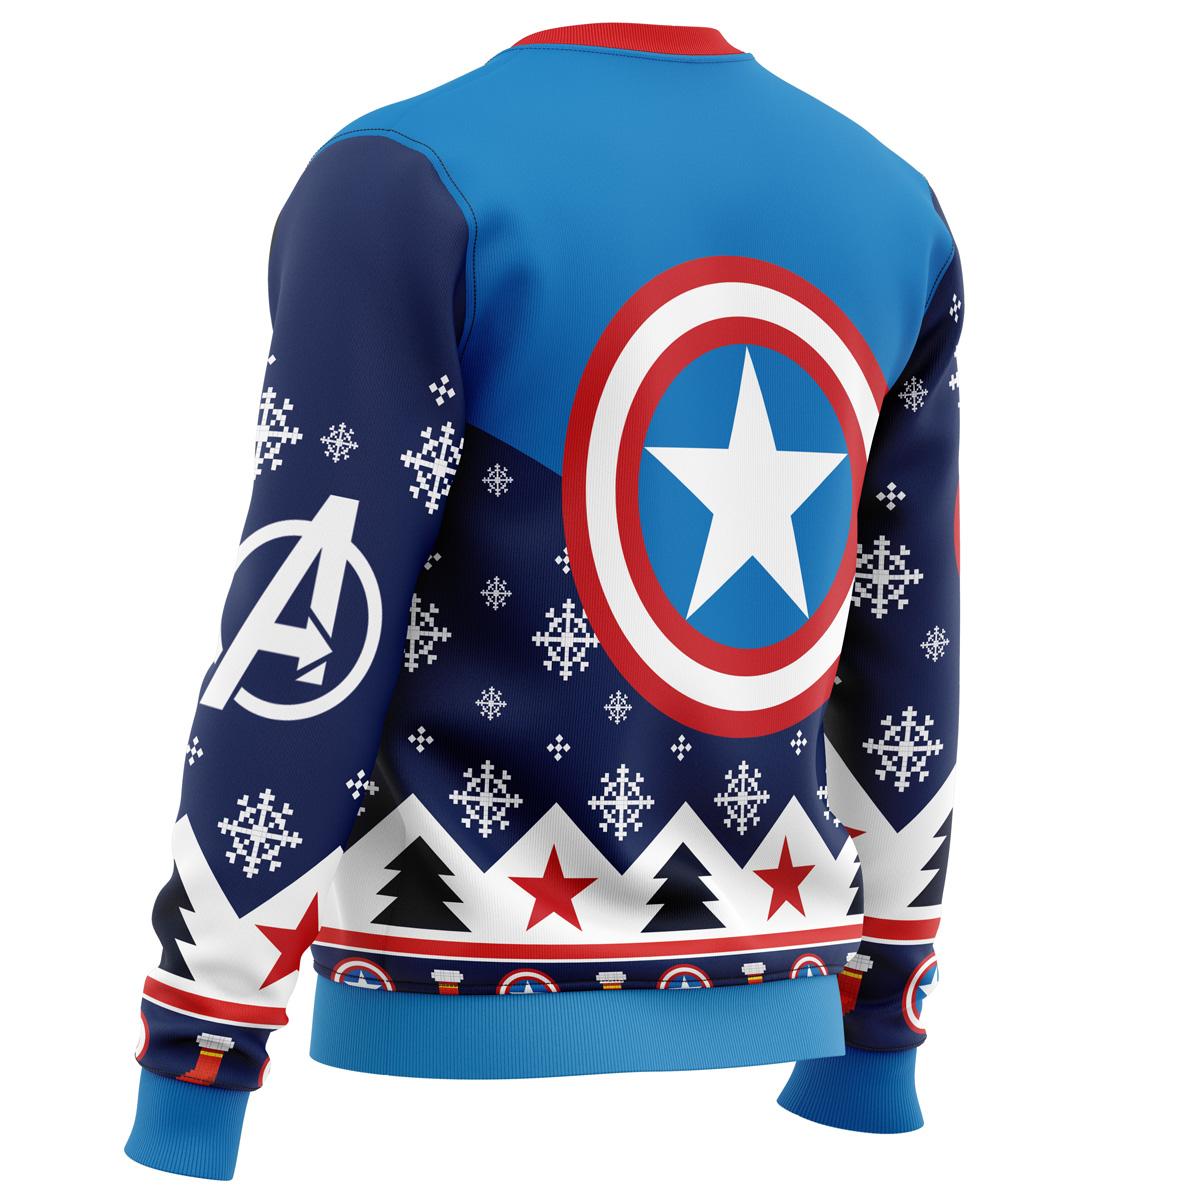 Captain America Ugly Sweater